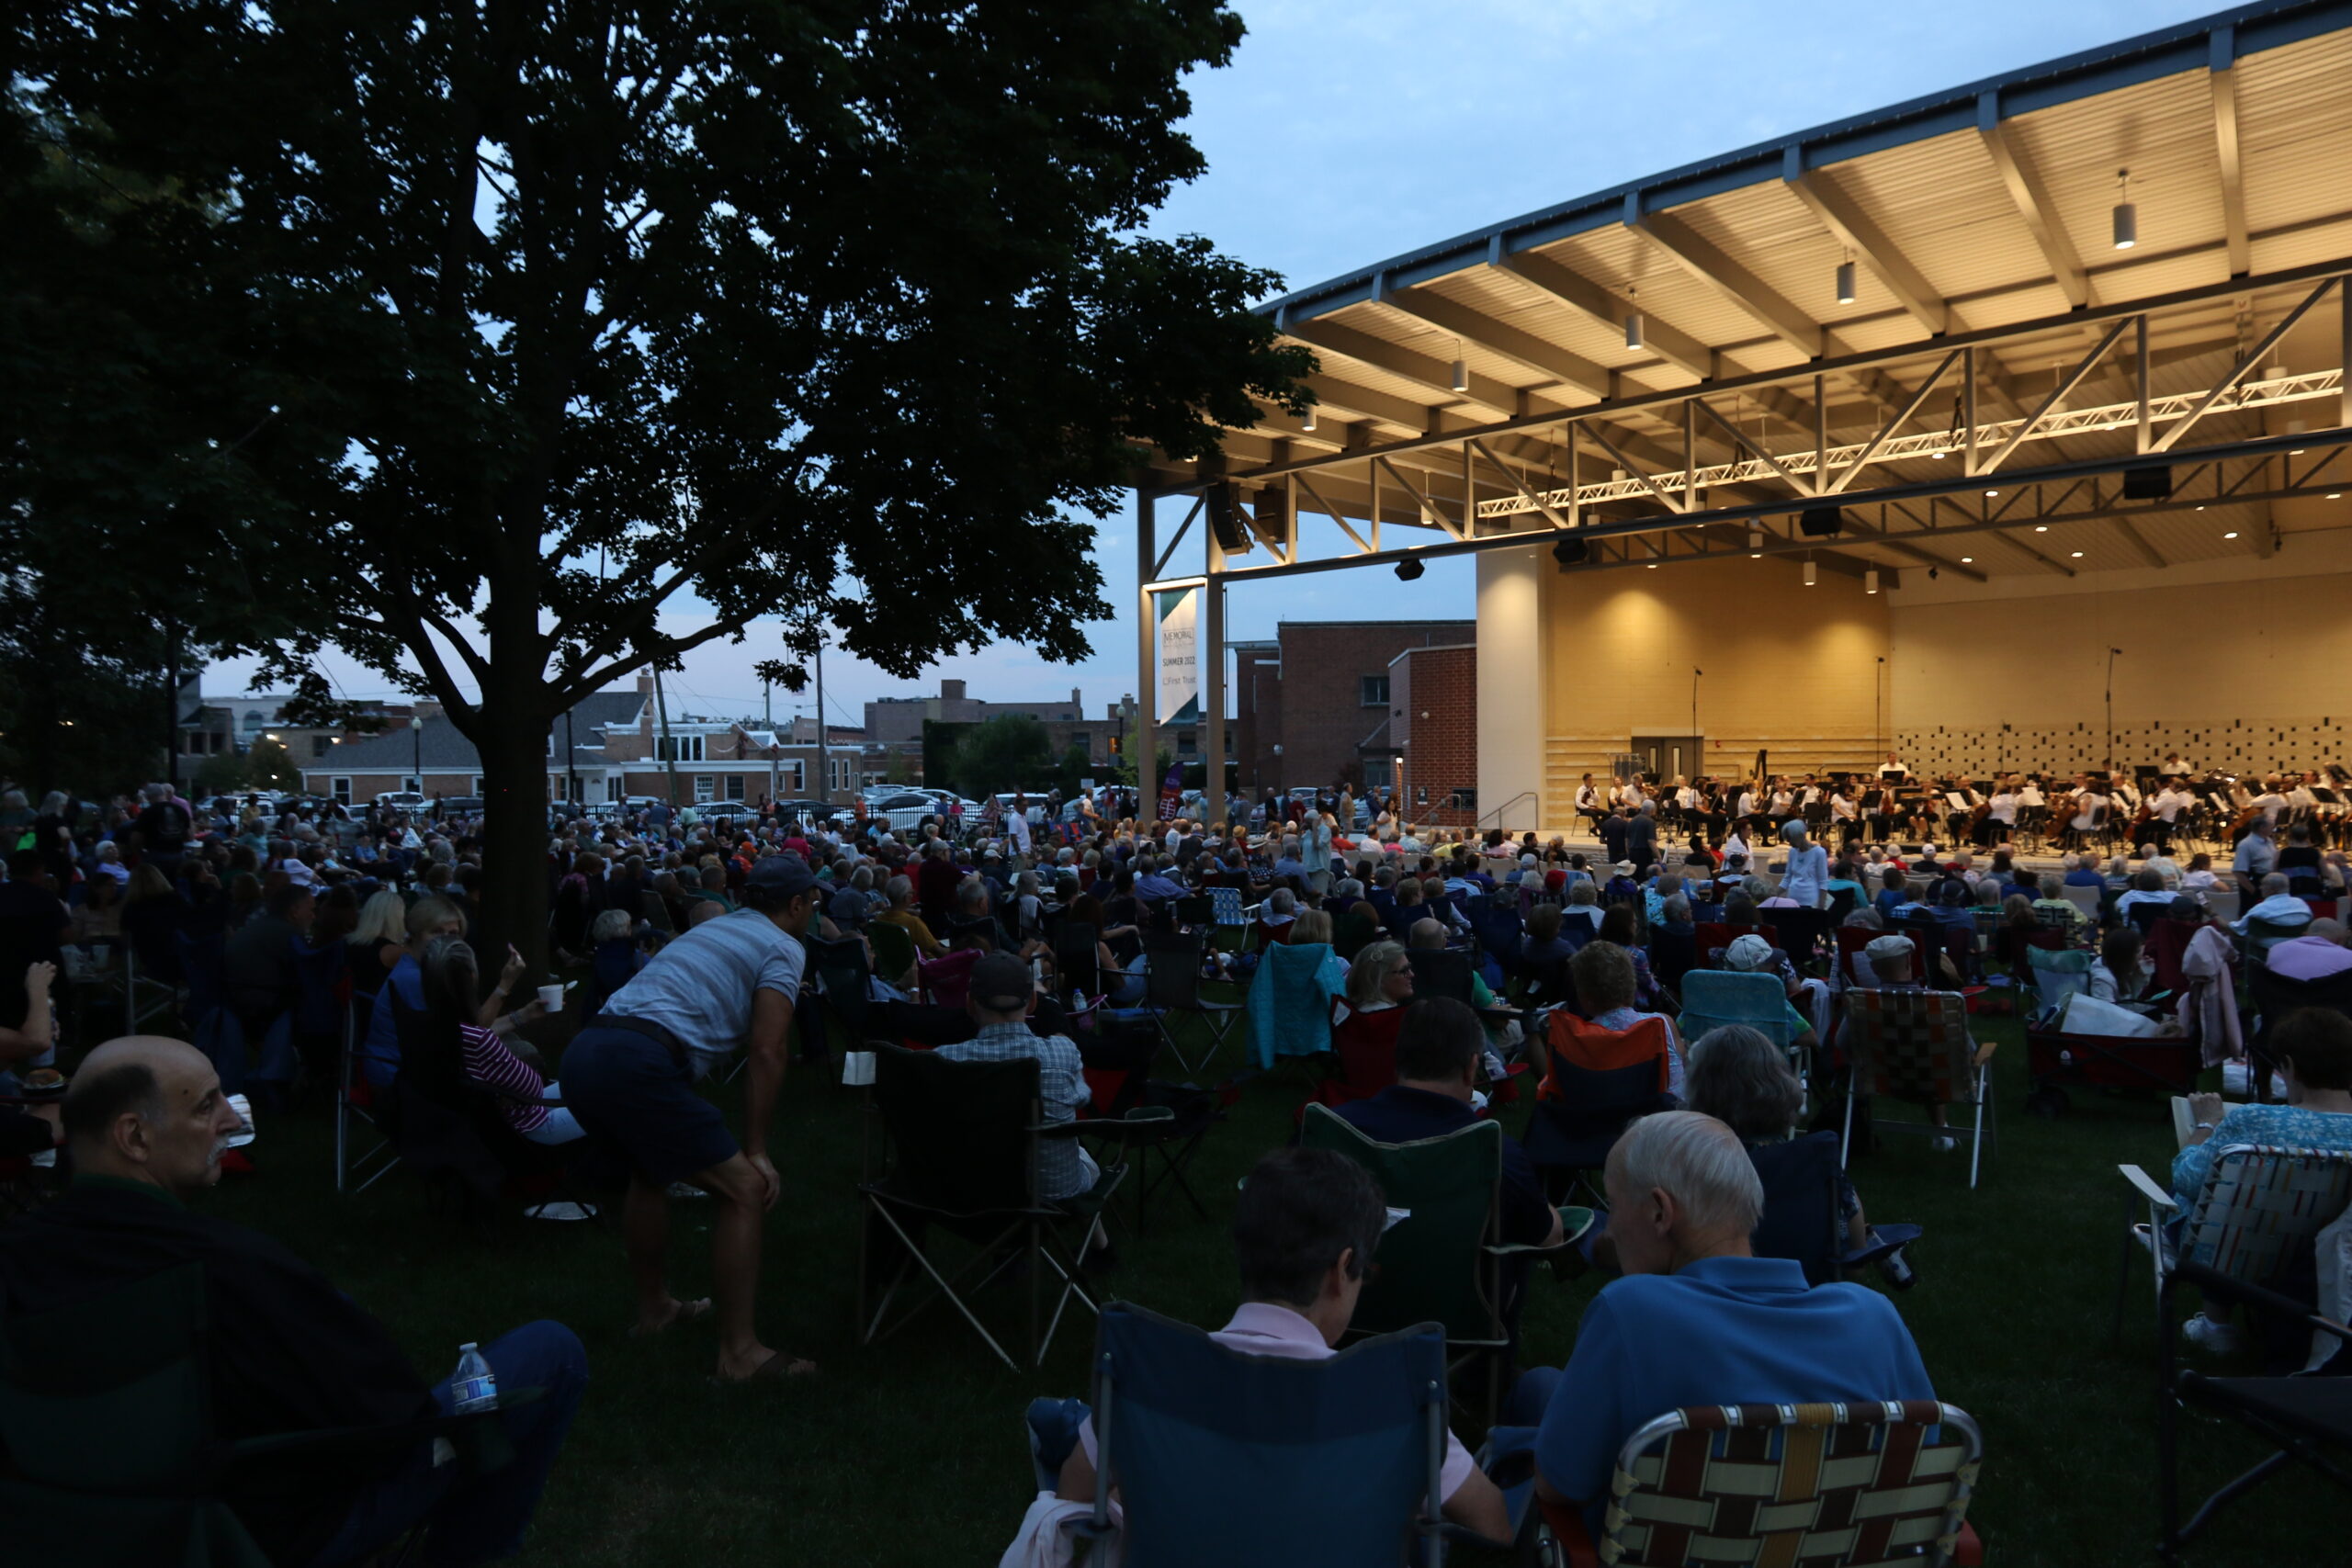 DSO at Wheaton Memorial Park DuPage Symphony Orchestra